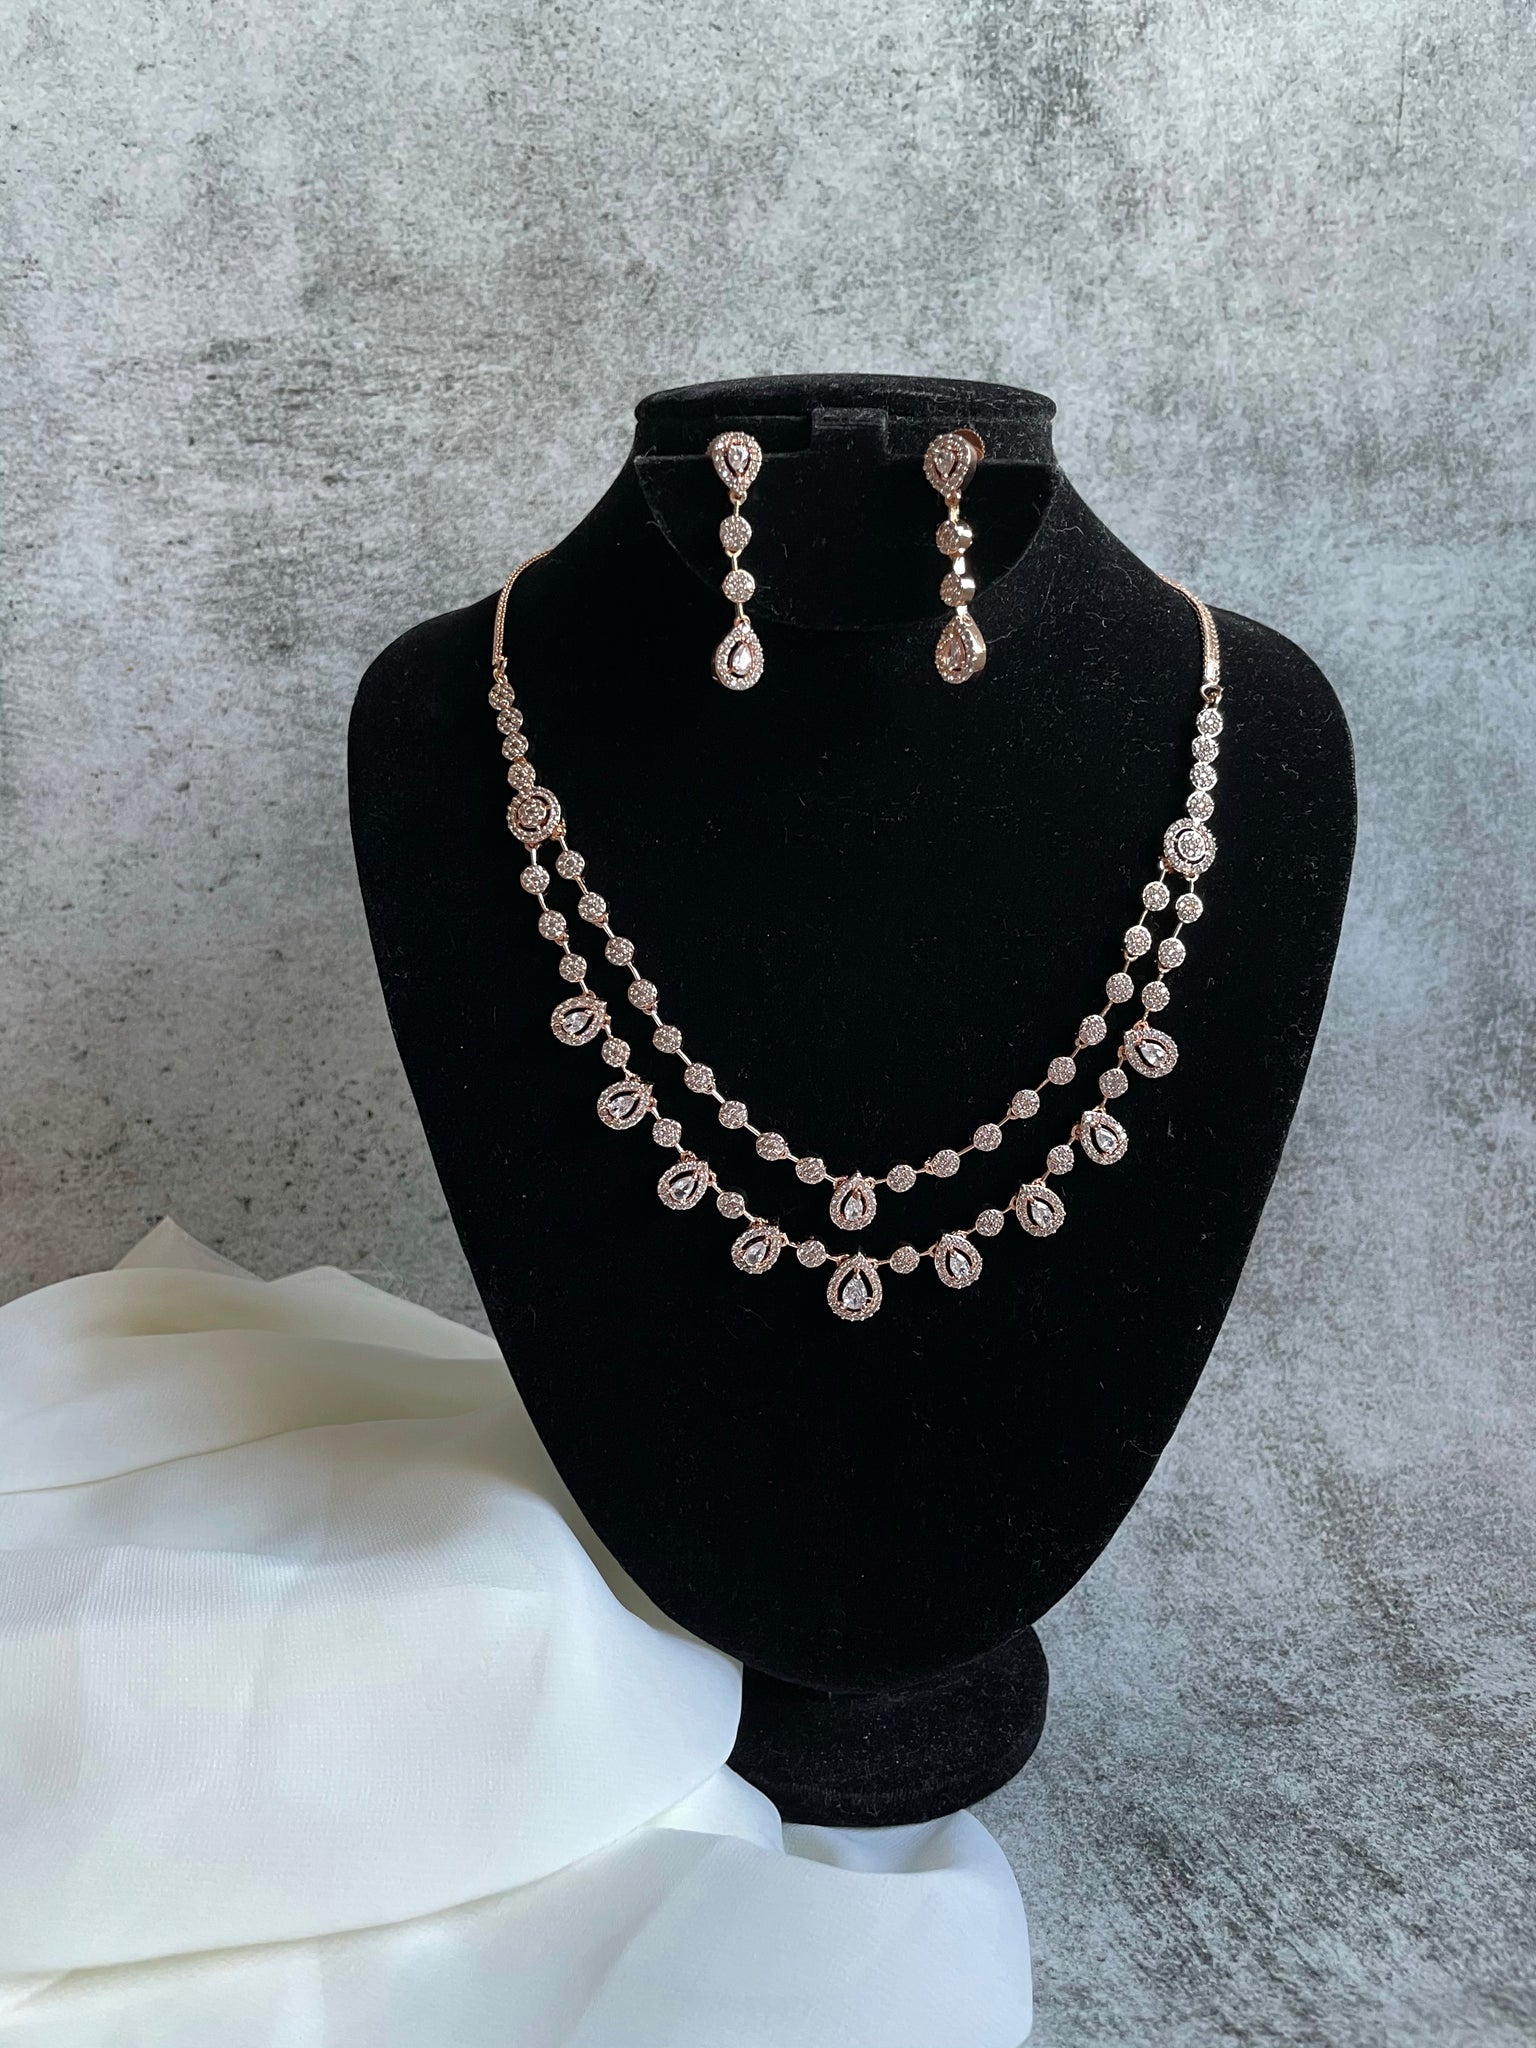 2 layer rose gold necklace with earrings